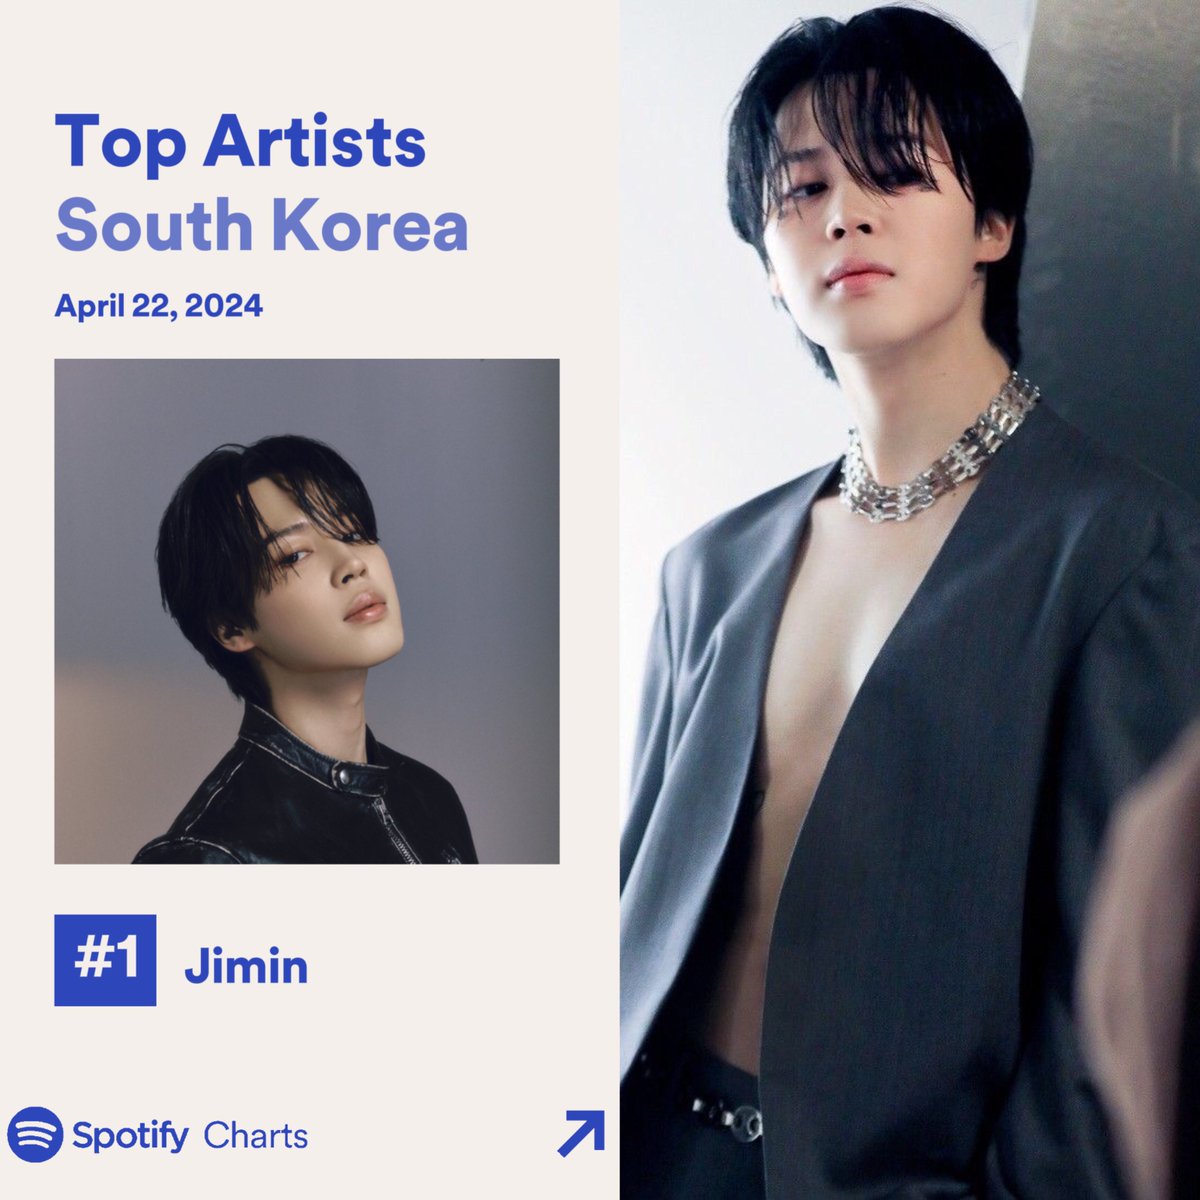 Jimin remains at #1 on Spotify Daily Top Artists South Korea on April 22, 2024. 🇰🇷 He extends his own record as the longest-charting solo artist at #1 with 288 days. 👏🏼 Congratulations, Jimin! 💕